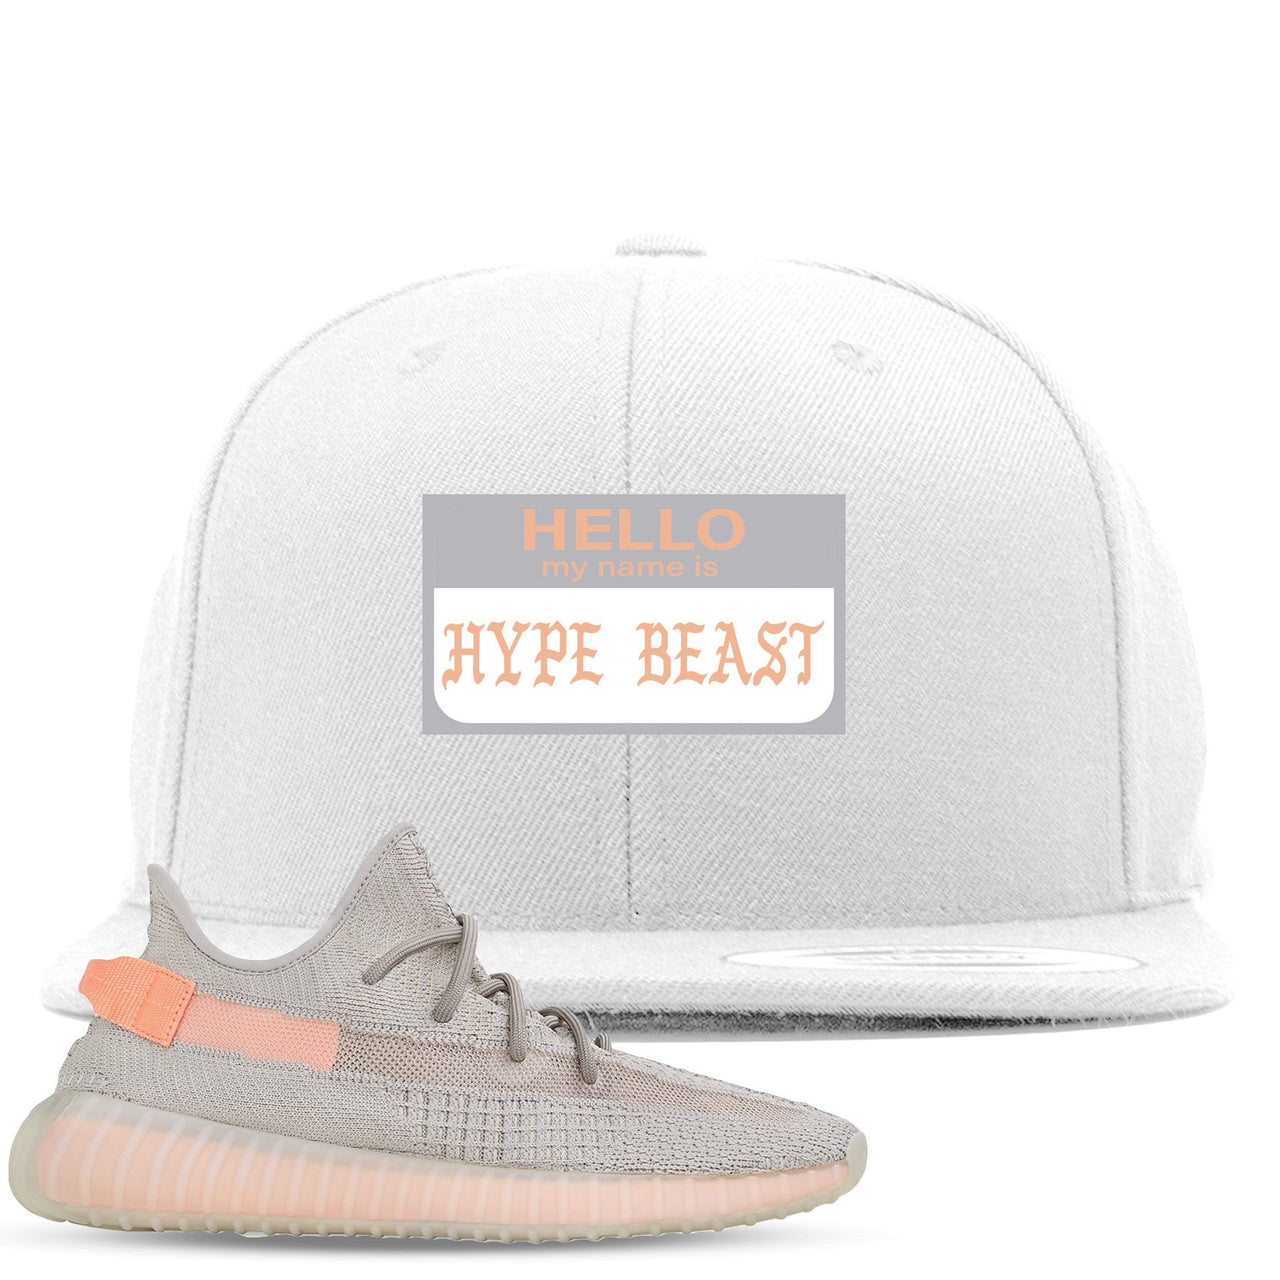 True Form v2 350s Snapback | Hello My Name Is Hype Beast Pablo, White